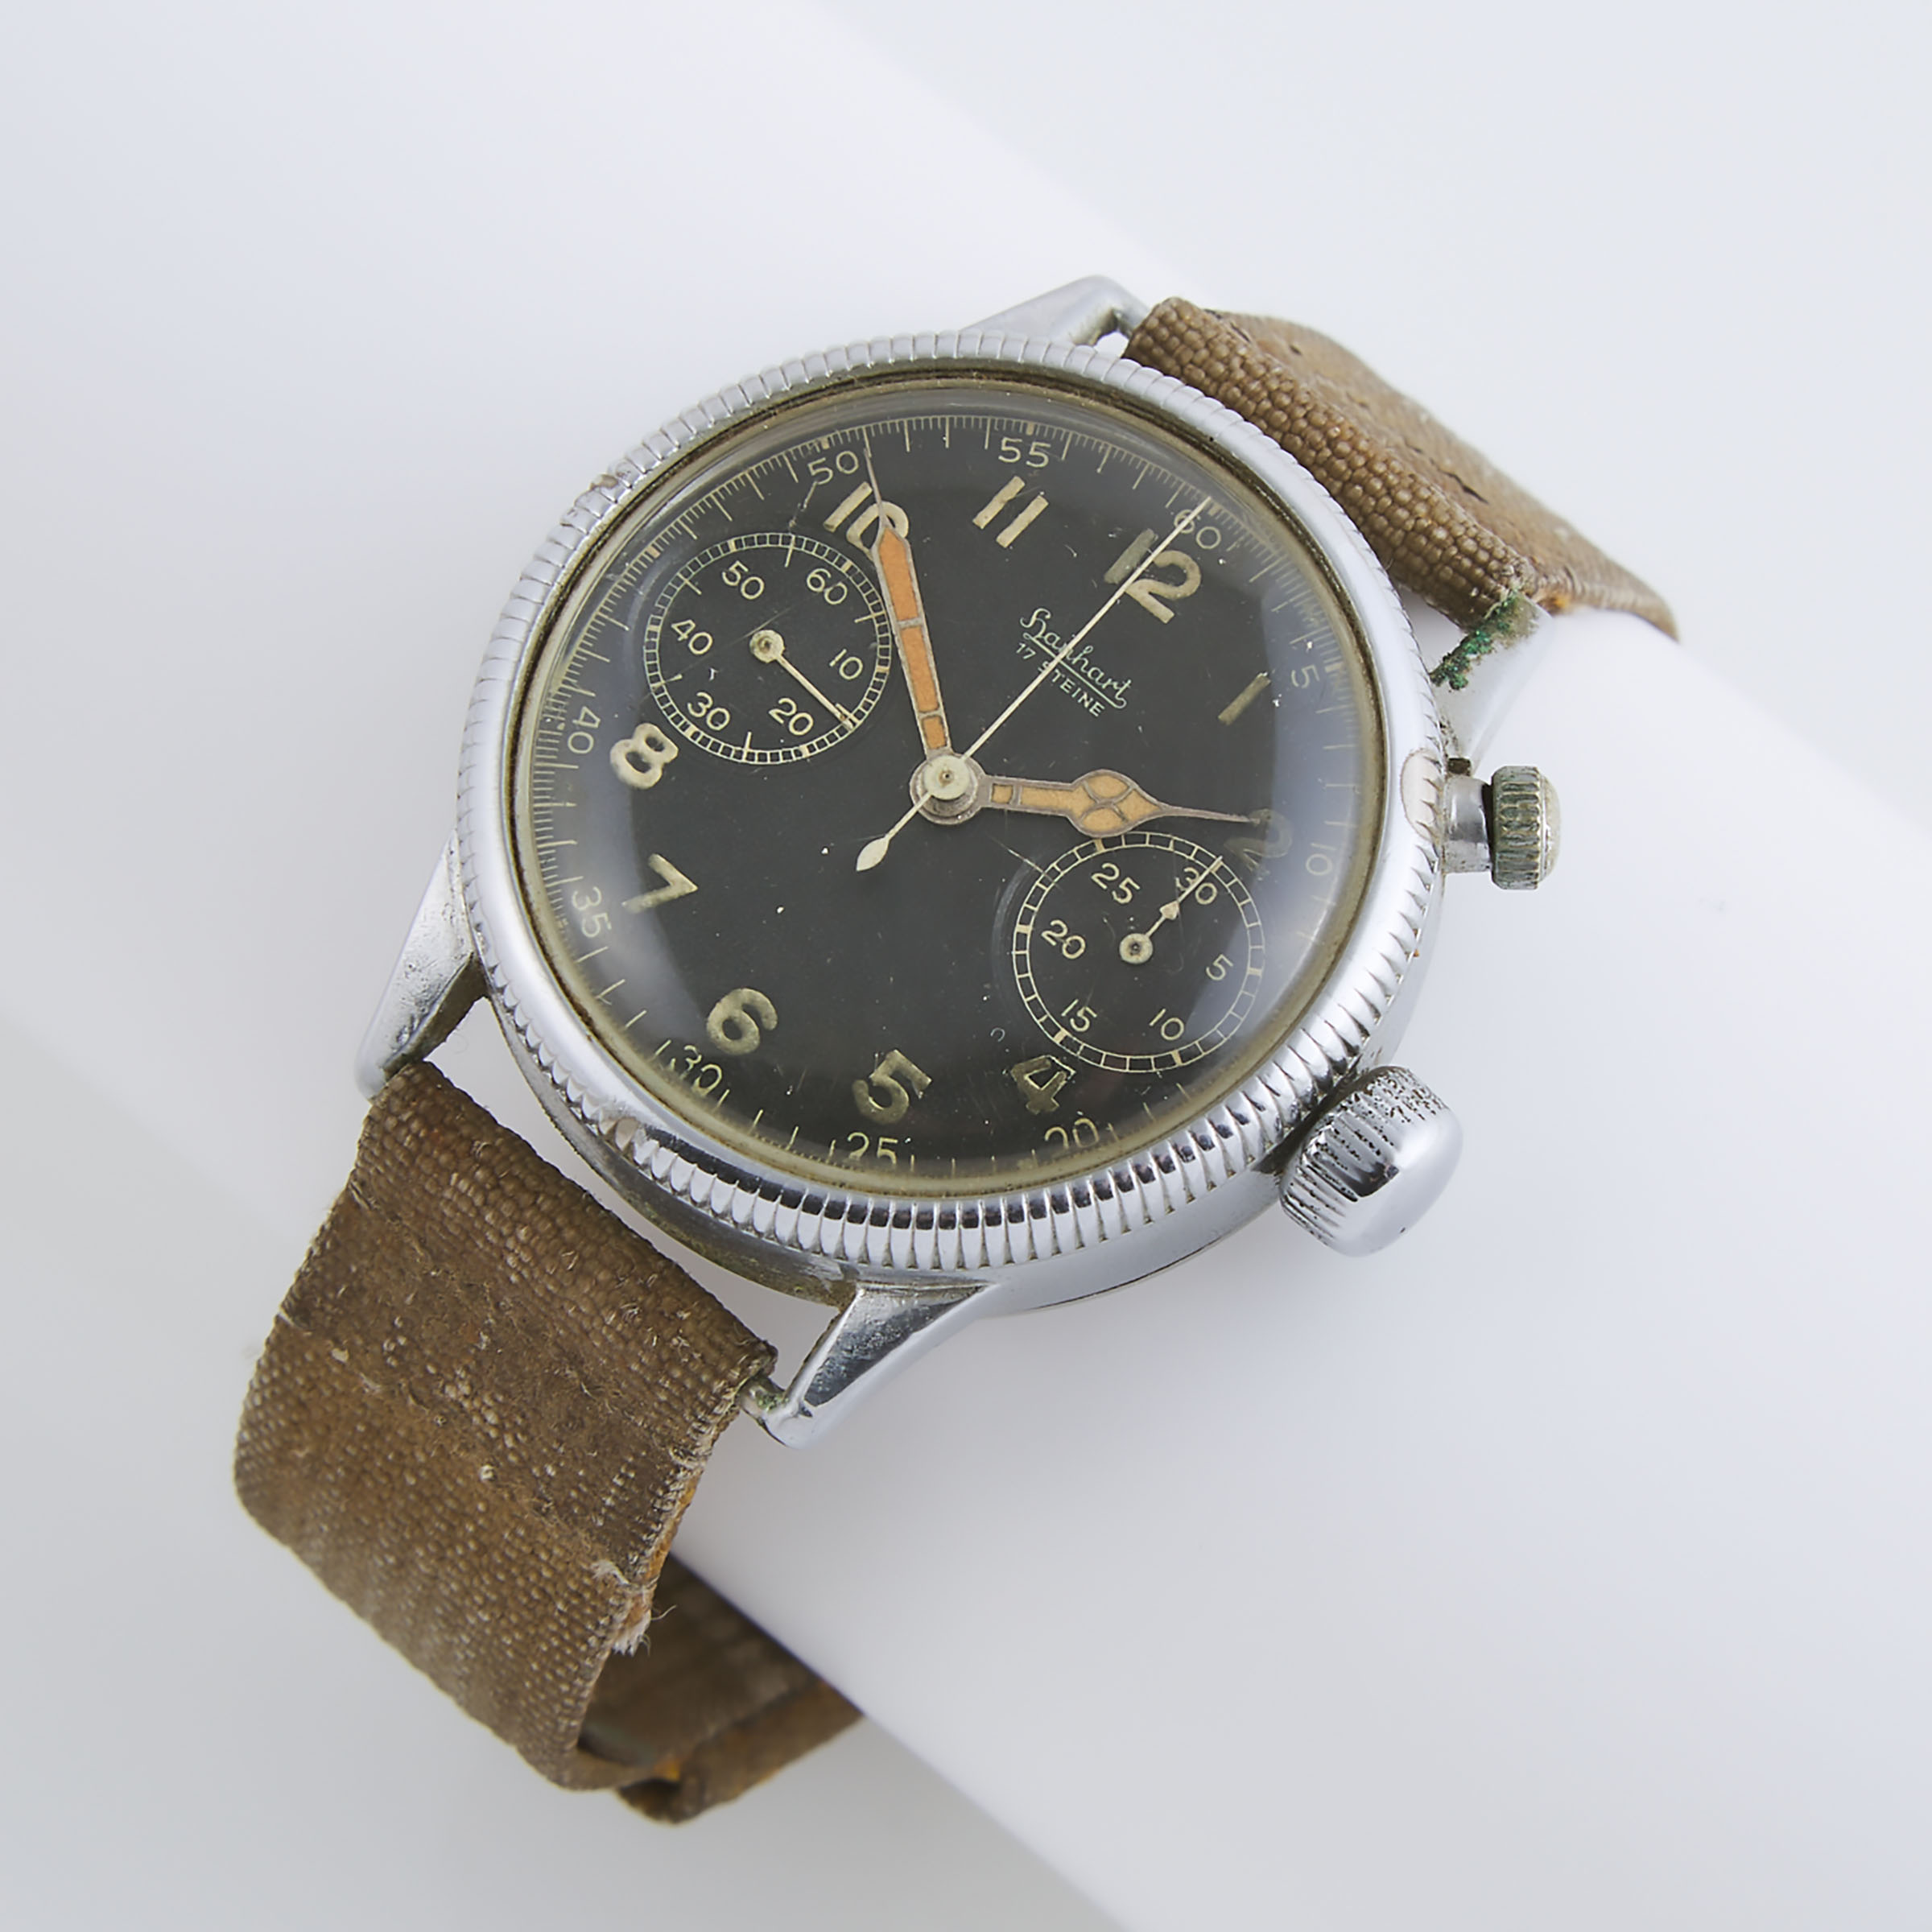 Hanhart Wristwatch With One Button Chronograph